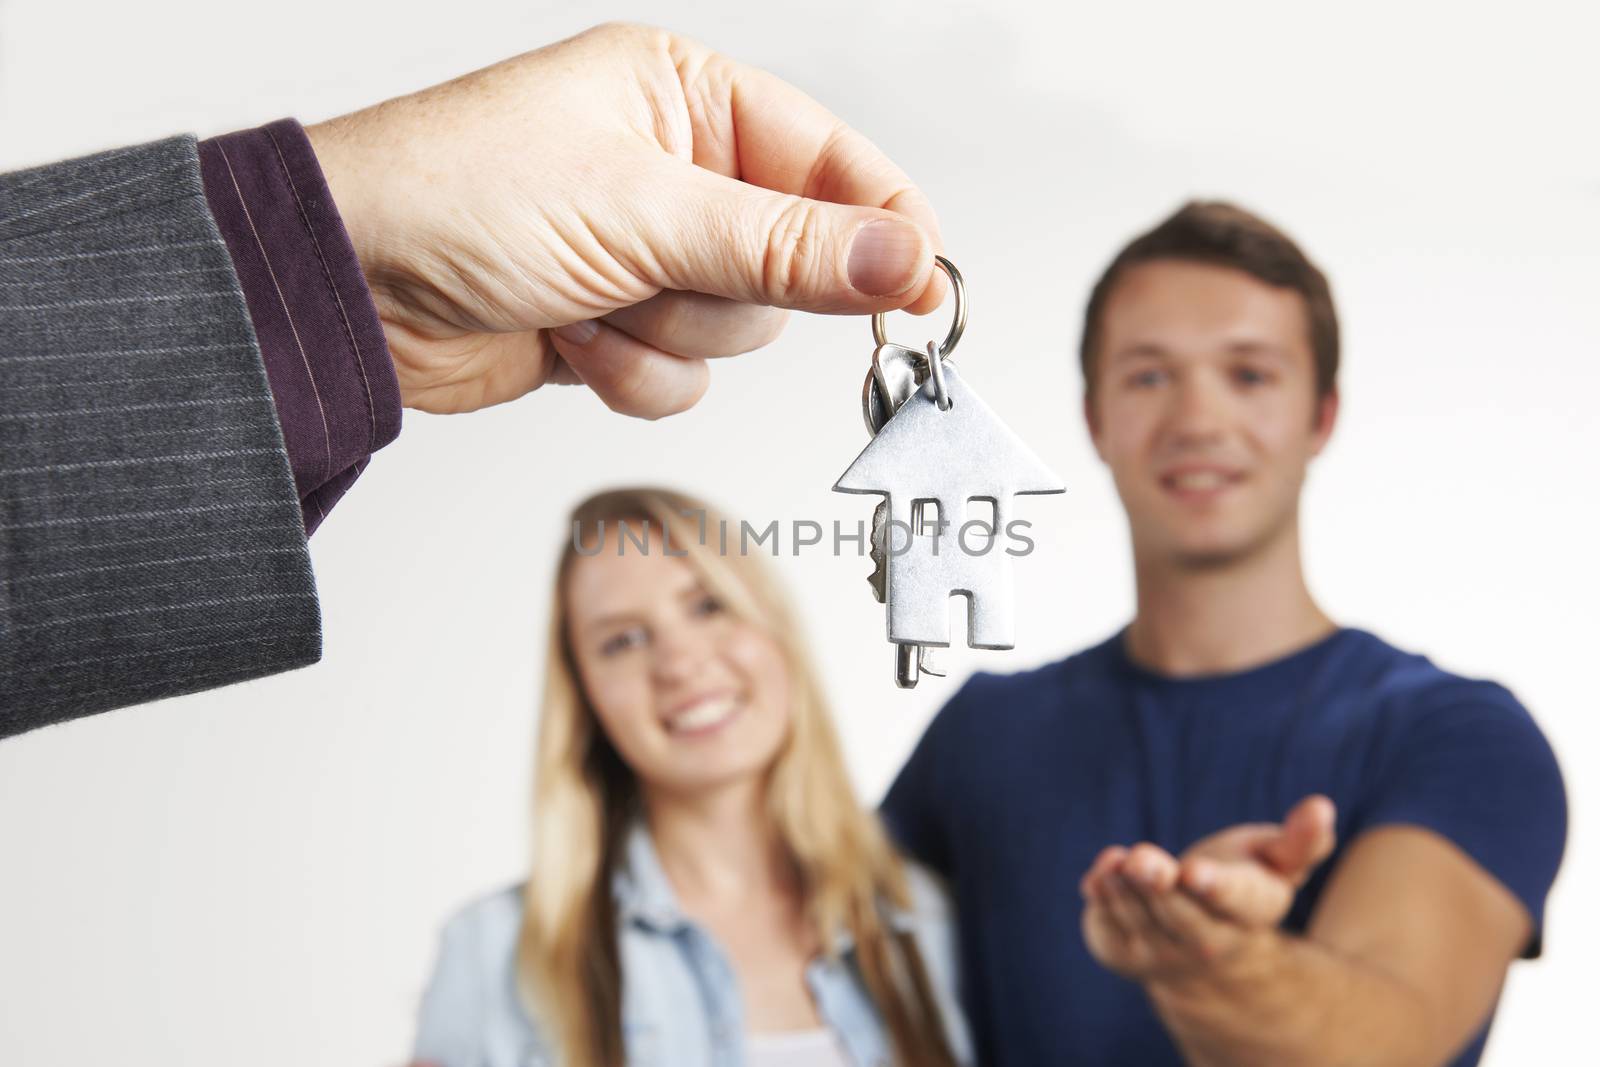 Estate Agent Handing Over House Keys To Young Couple